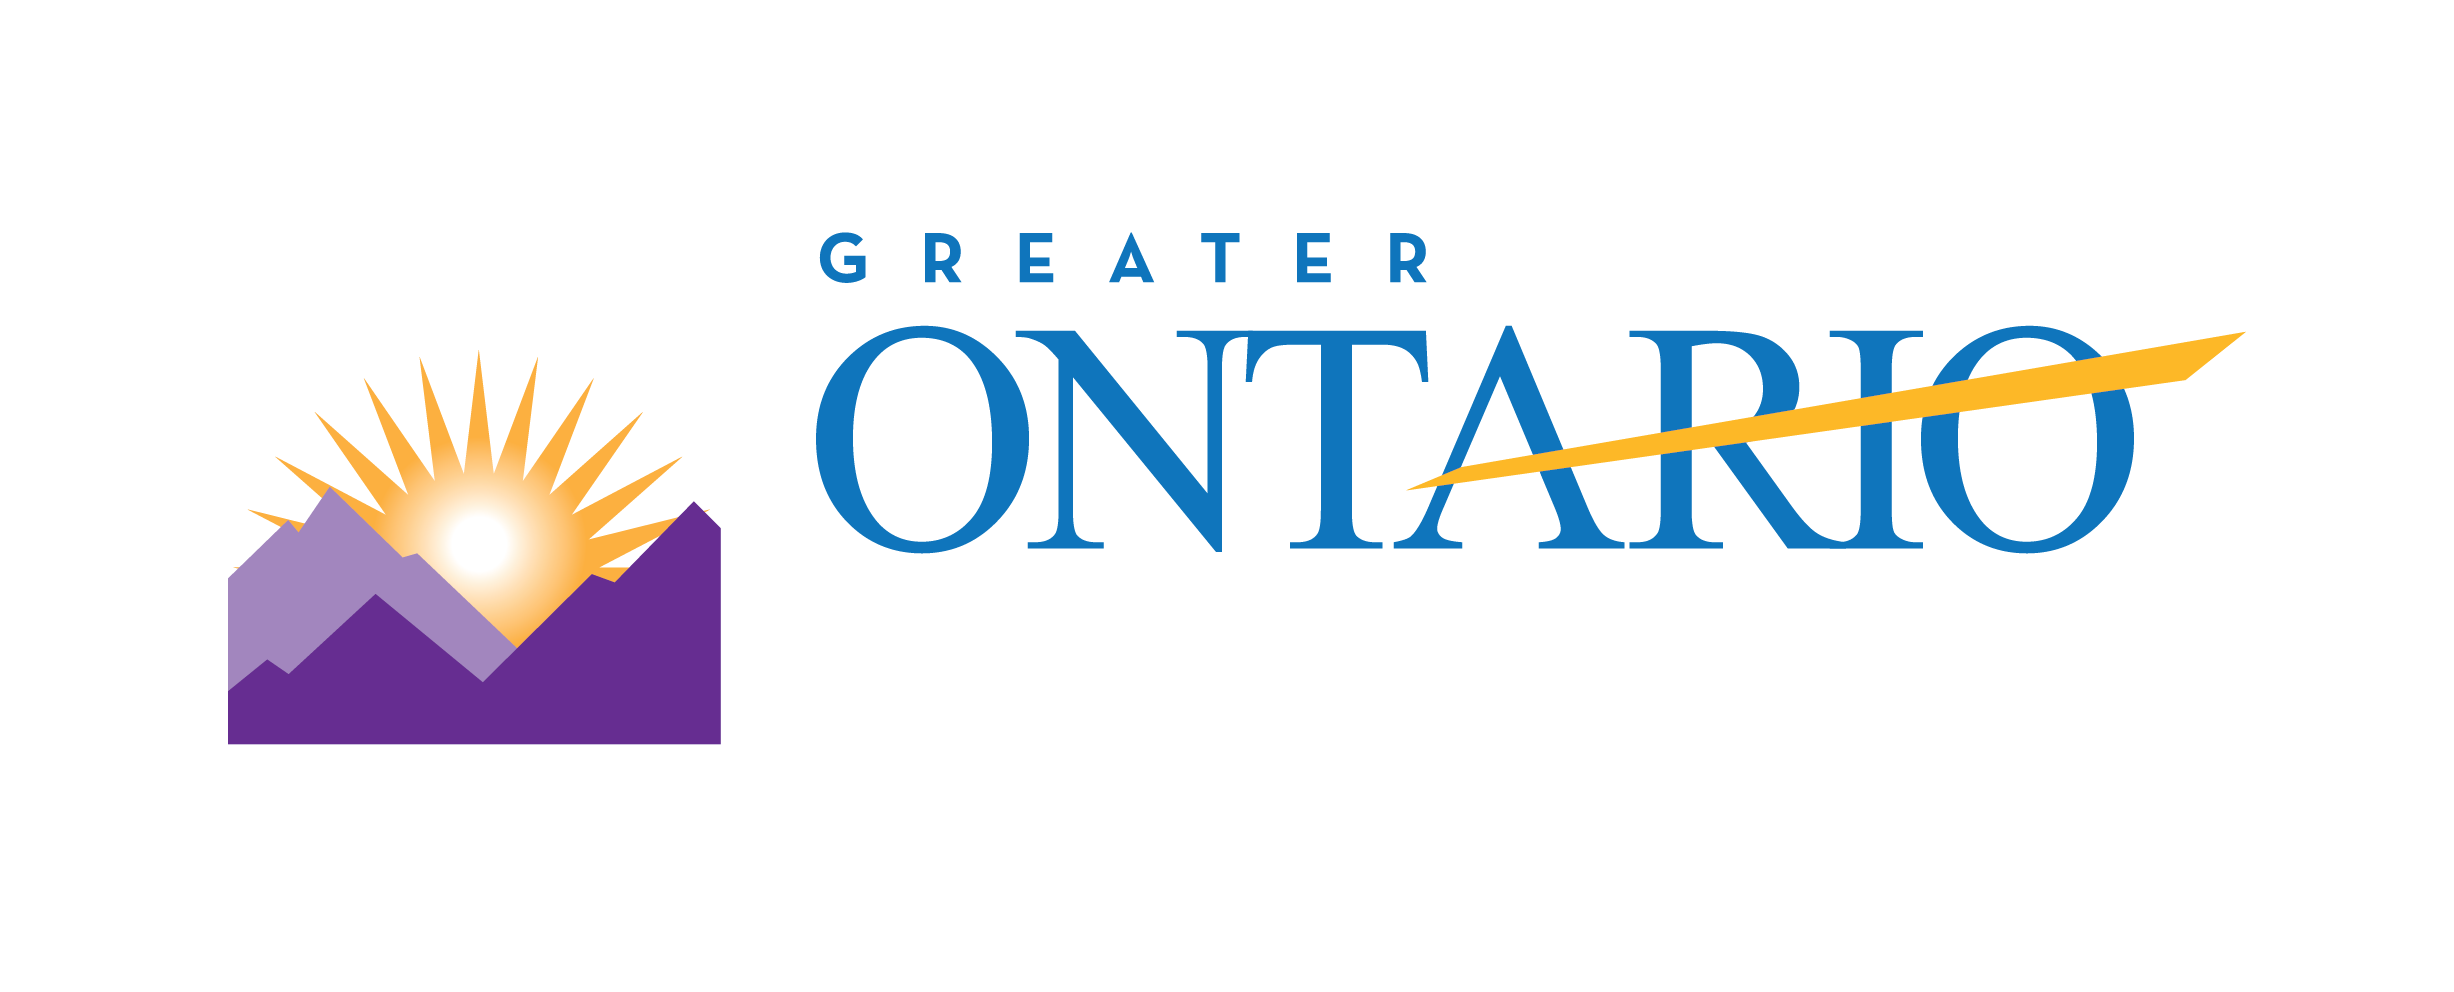 Greater Ontario Business Council